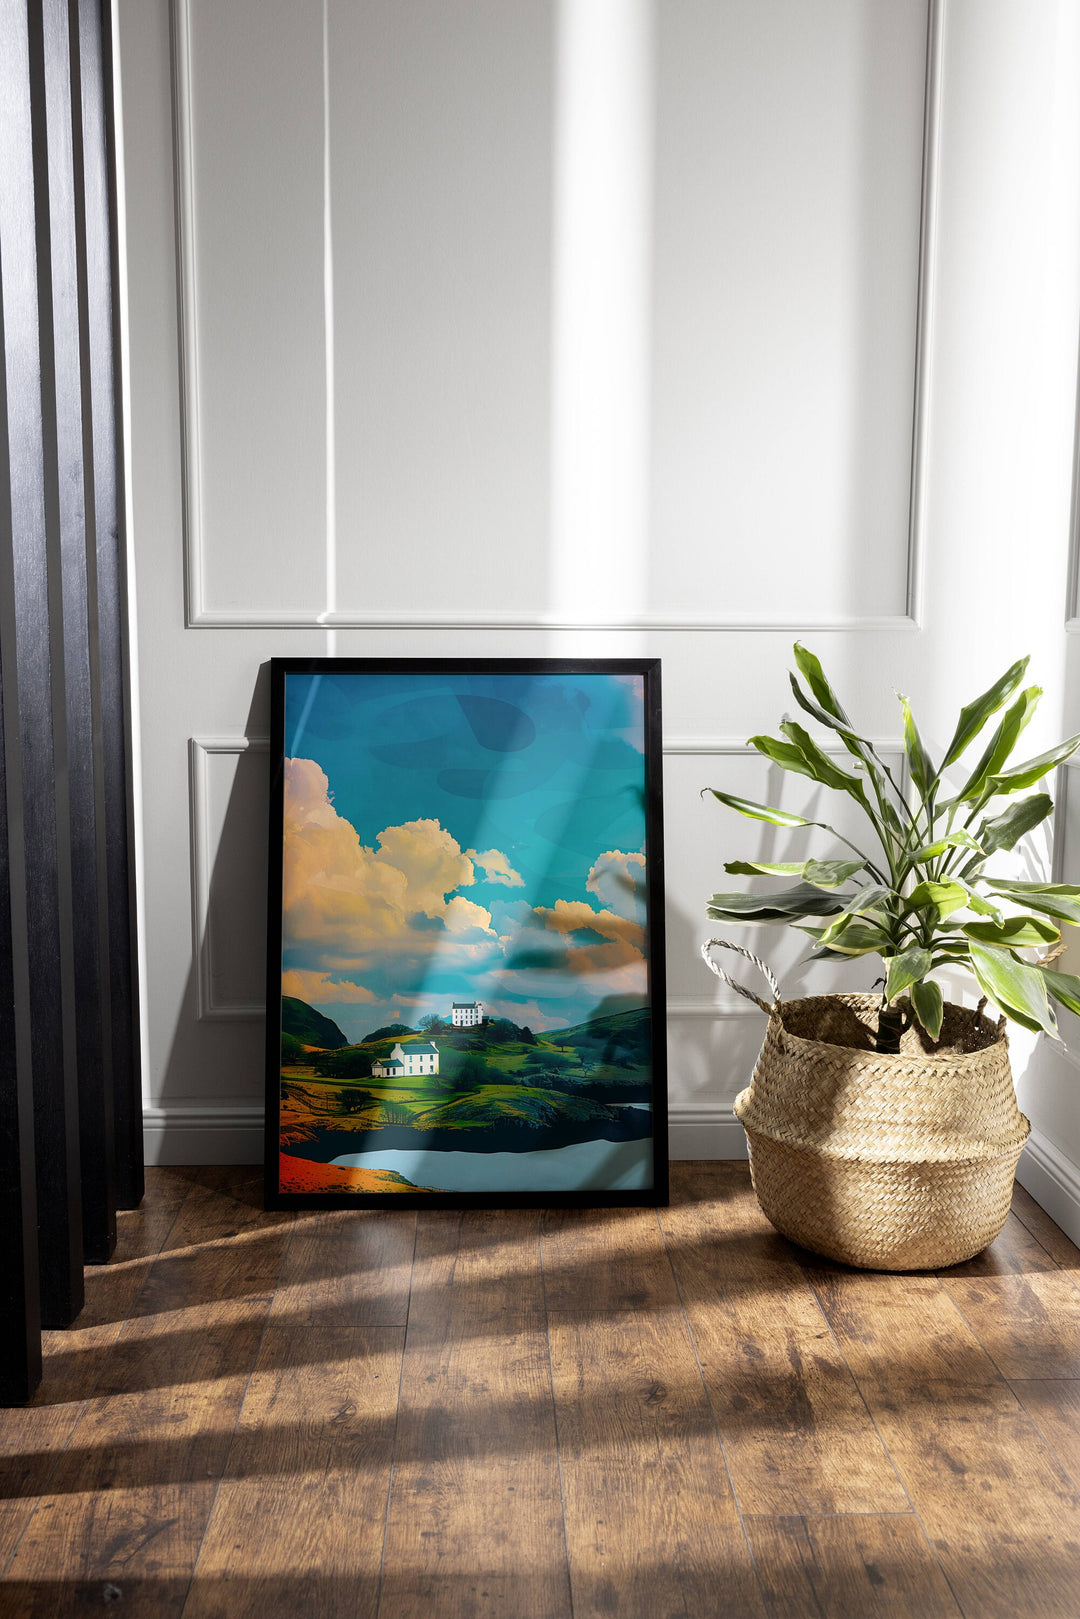 nowdonia art: a vibrant portrayal of the National Parks beauty. Ideal for hikers and nature lovers. Perfect housewarming or travel-themed gift.